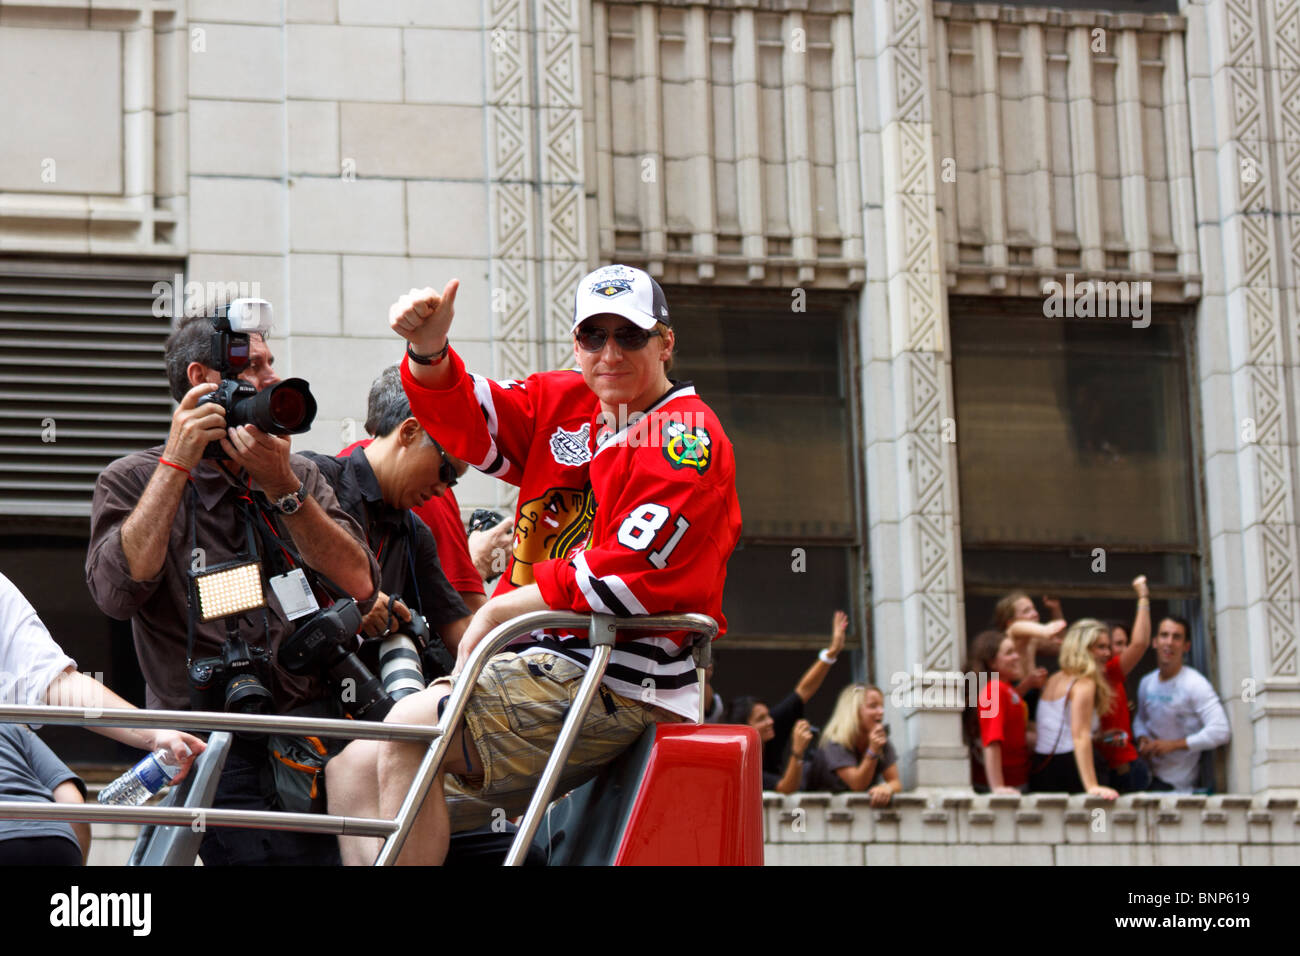 Marian Hossa of the Chicago Blackhawks at the 2010 Chicago Blackhawks parade and rally in downtown Chicago, IL Stock Photo